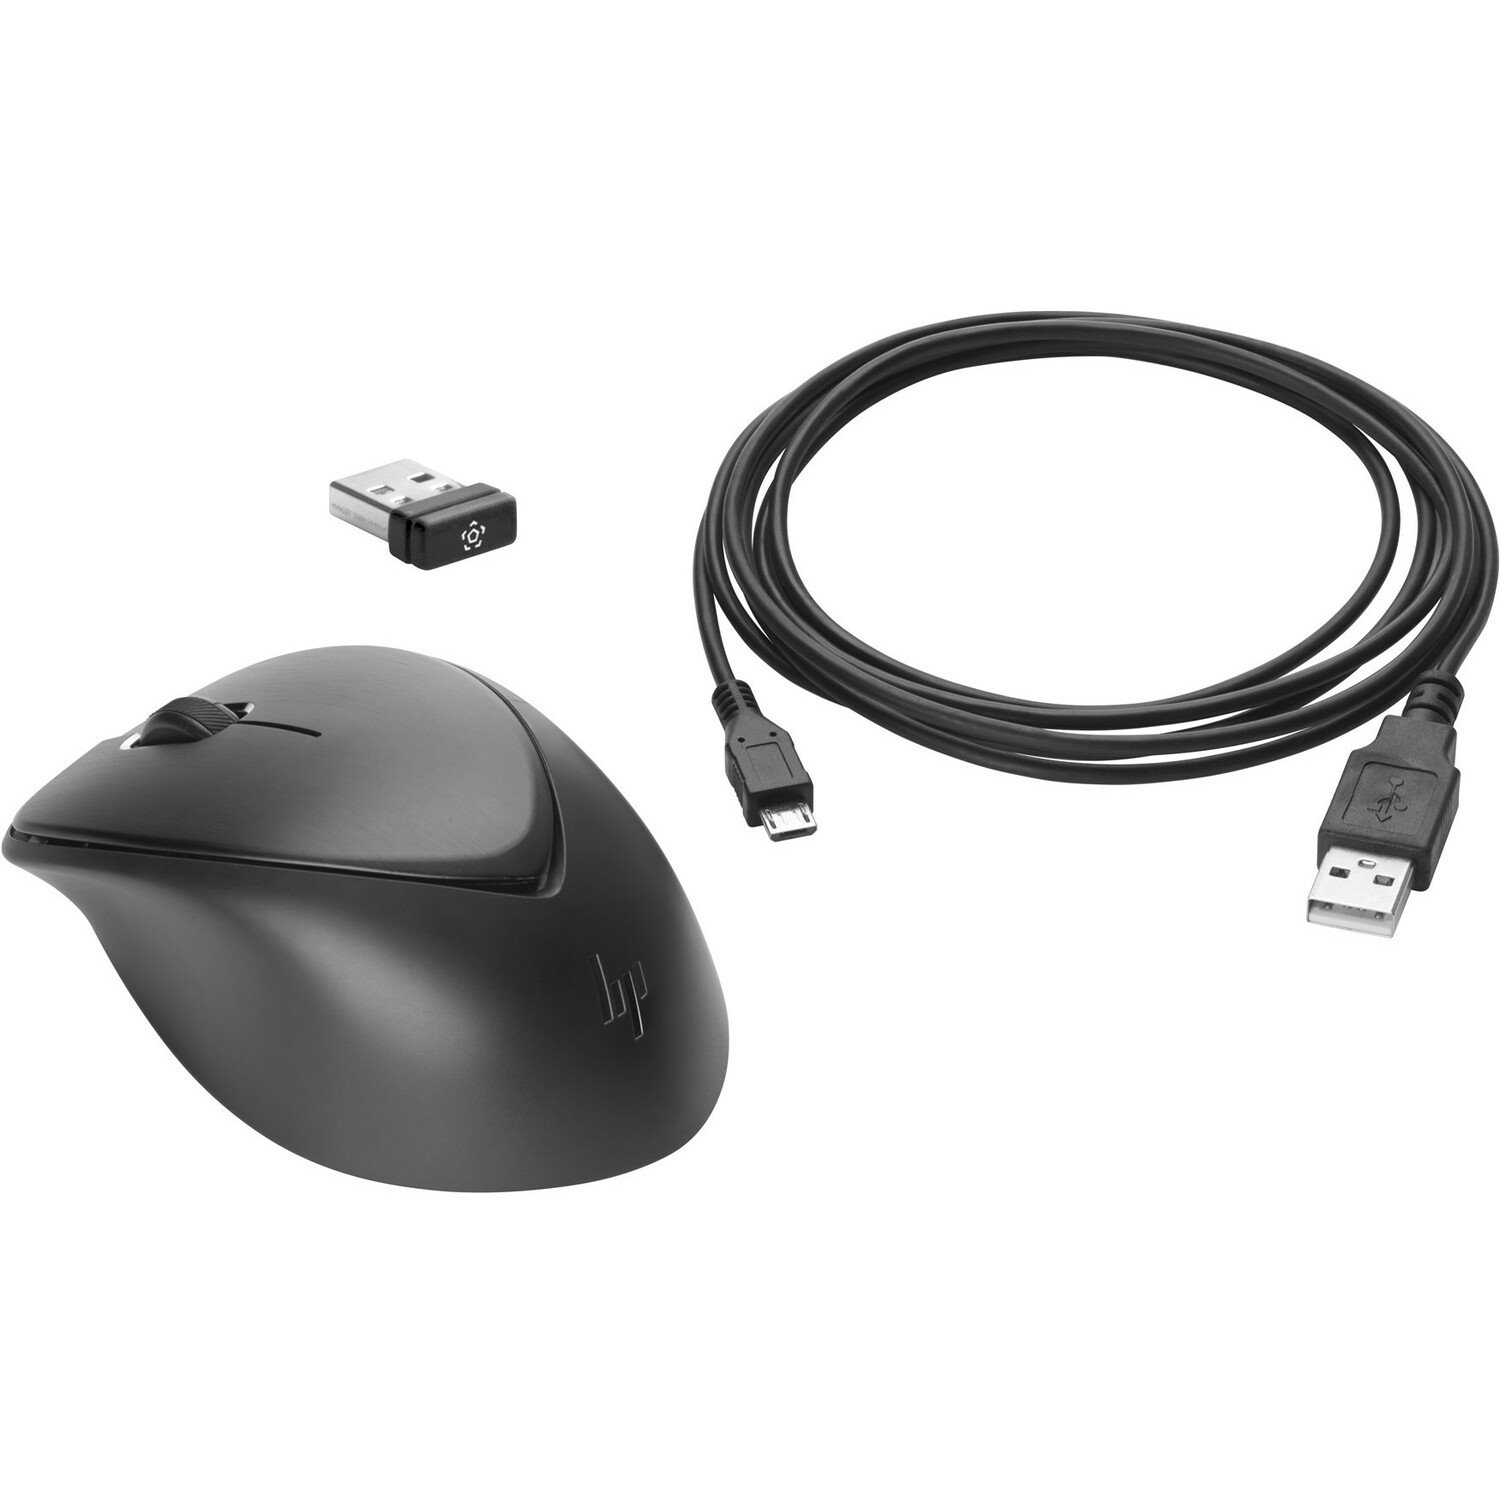 HP Premium Mouse - Radio Frequency - USB - Laser - 3 Button(s) - Black